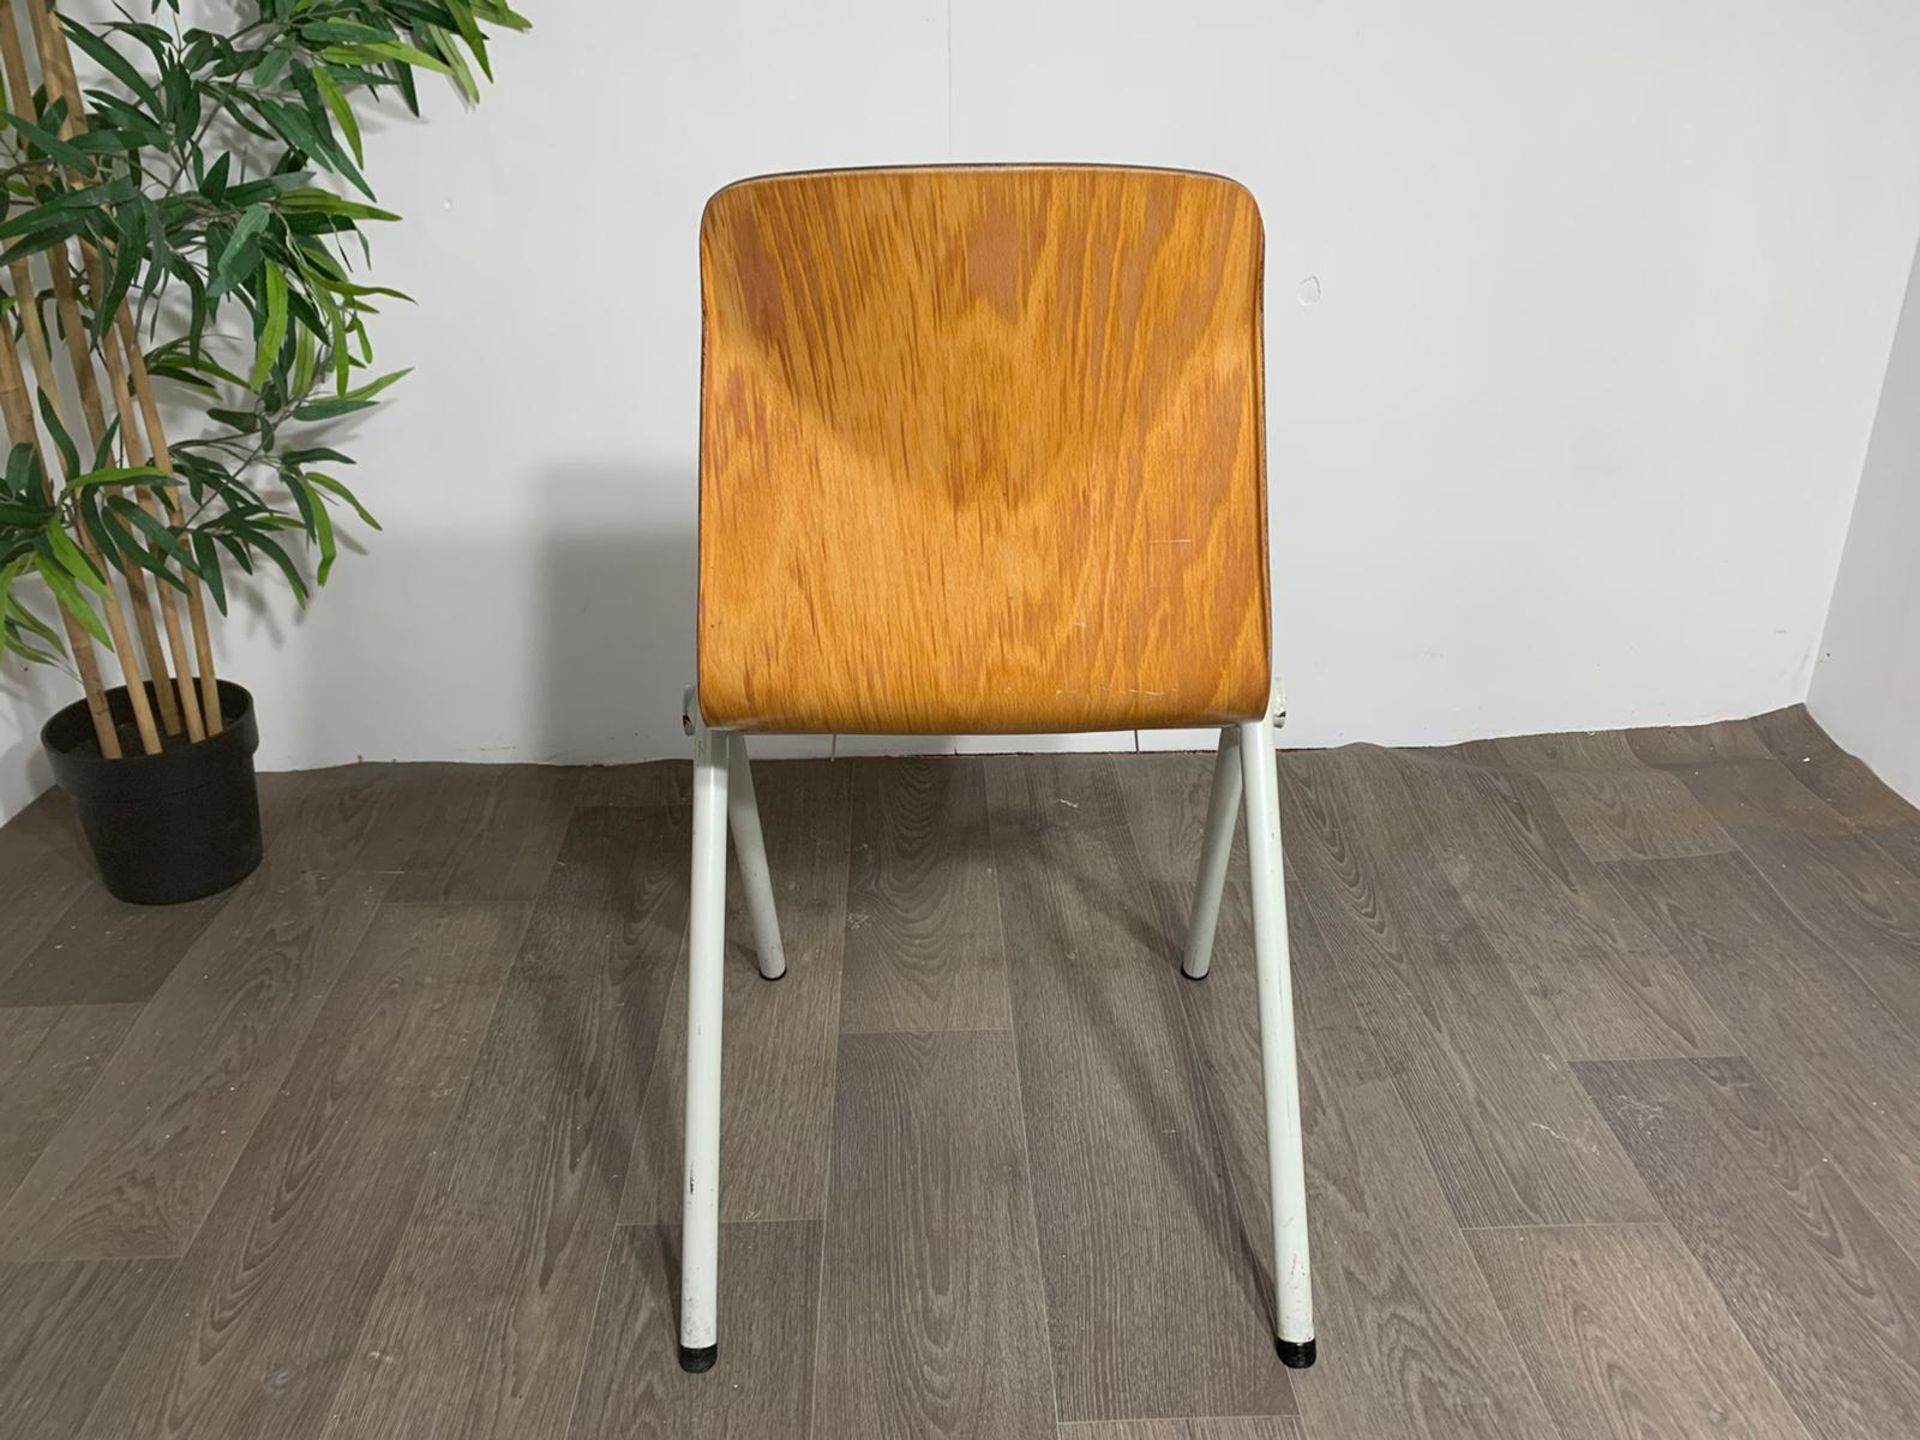 Mid Century Wooden Chair with Steel Legs - Image 4 of 10